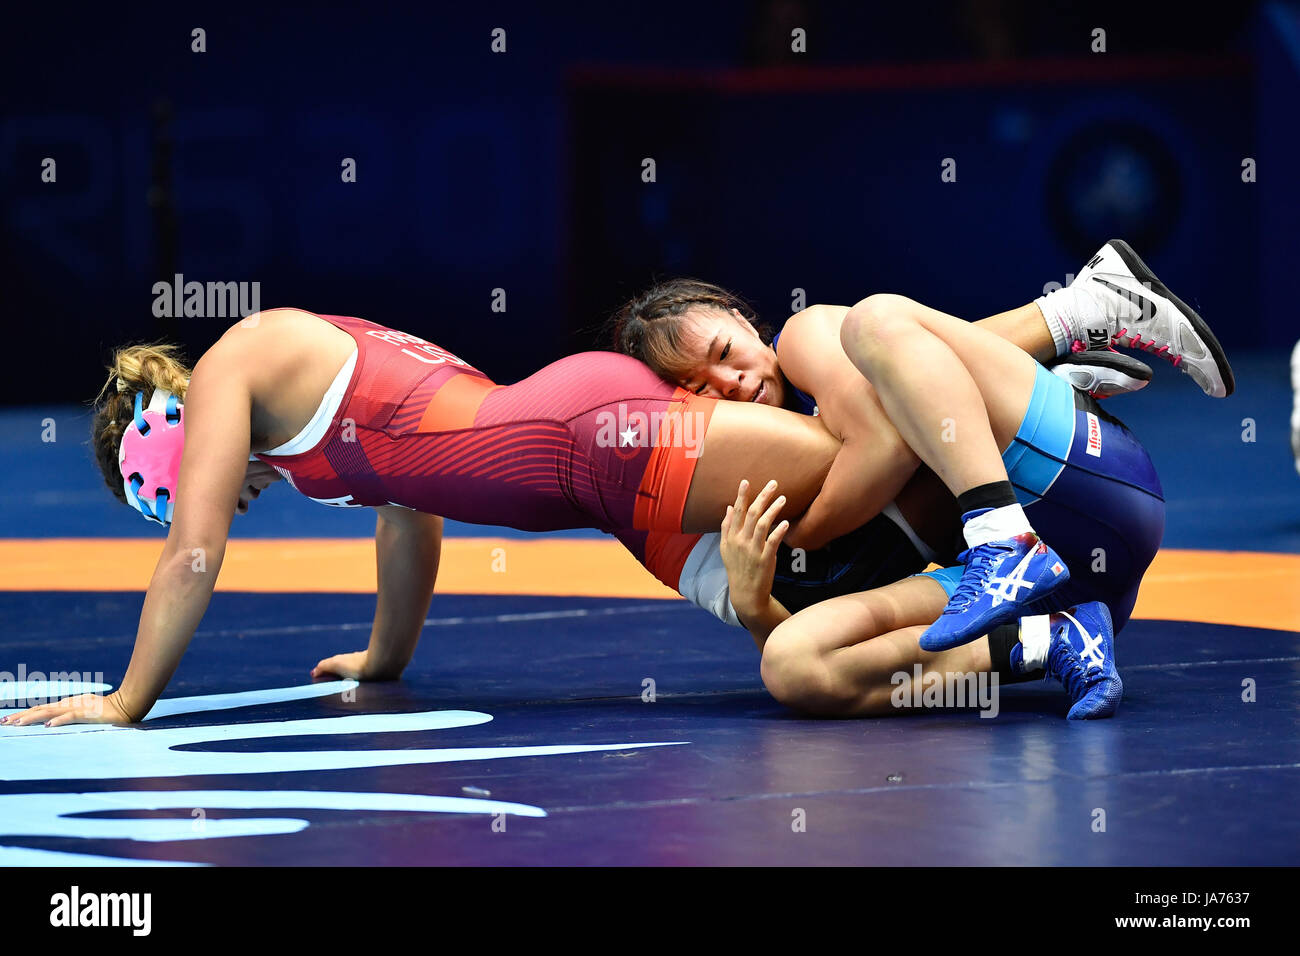 170825) -- PARIS, Aug. 25, 2017 (Xinhua) -- Kawai Risako (R) of Japan  competes with Allison Mackenzie Ragan of the United States during the final  match of women's 60kg wrestling of the